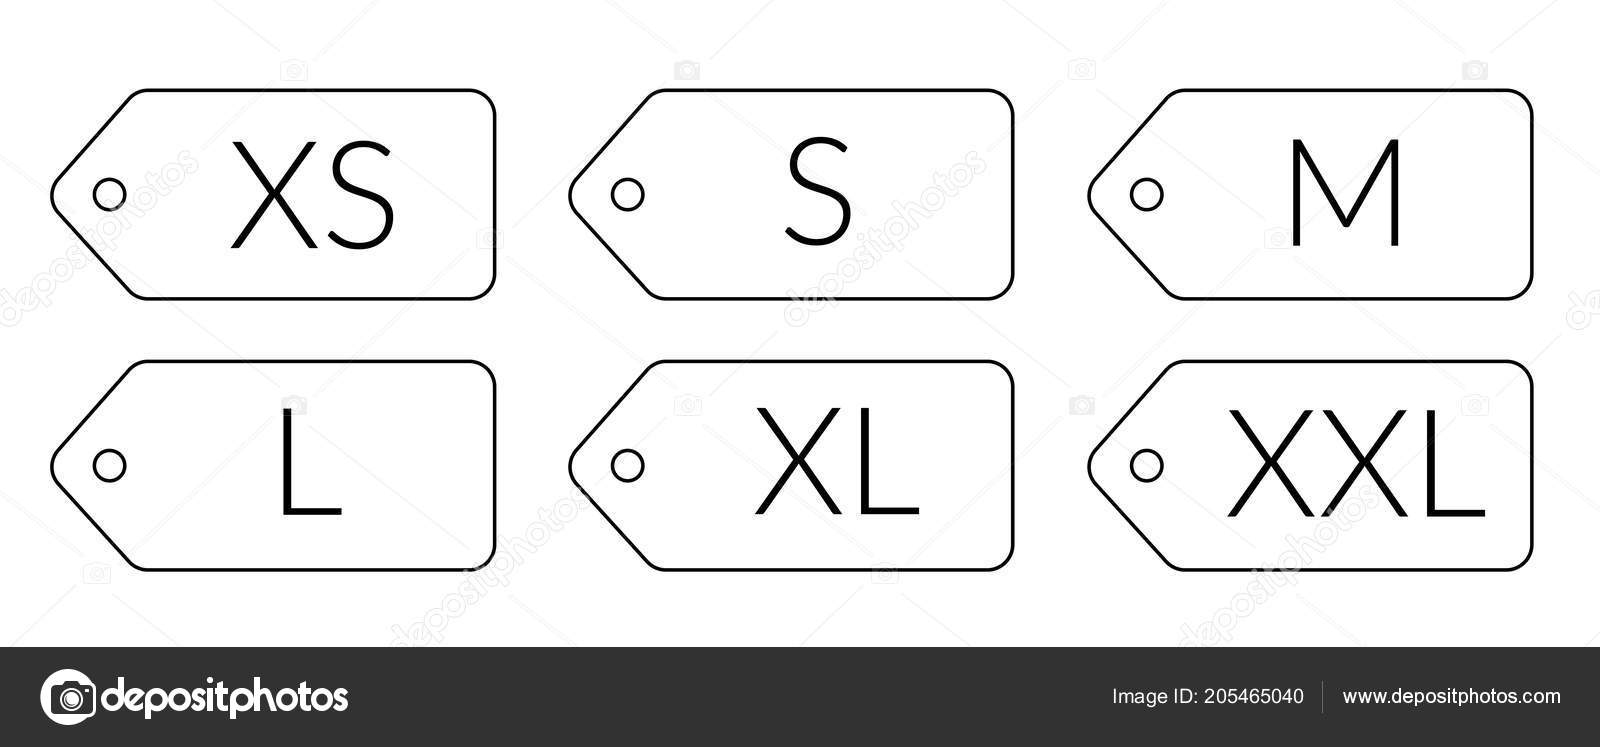 Set Icons Sizes Clothes Xxl Label Size Collection Vector Icons Vector Image By C Darina Wk Gmail Com Vector Stock